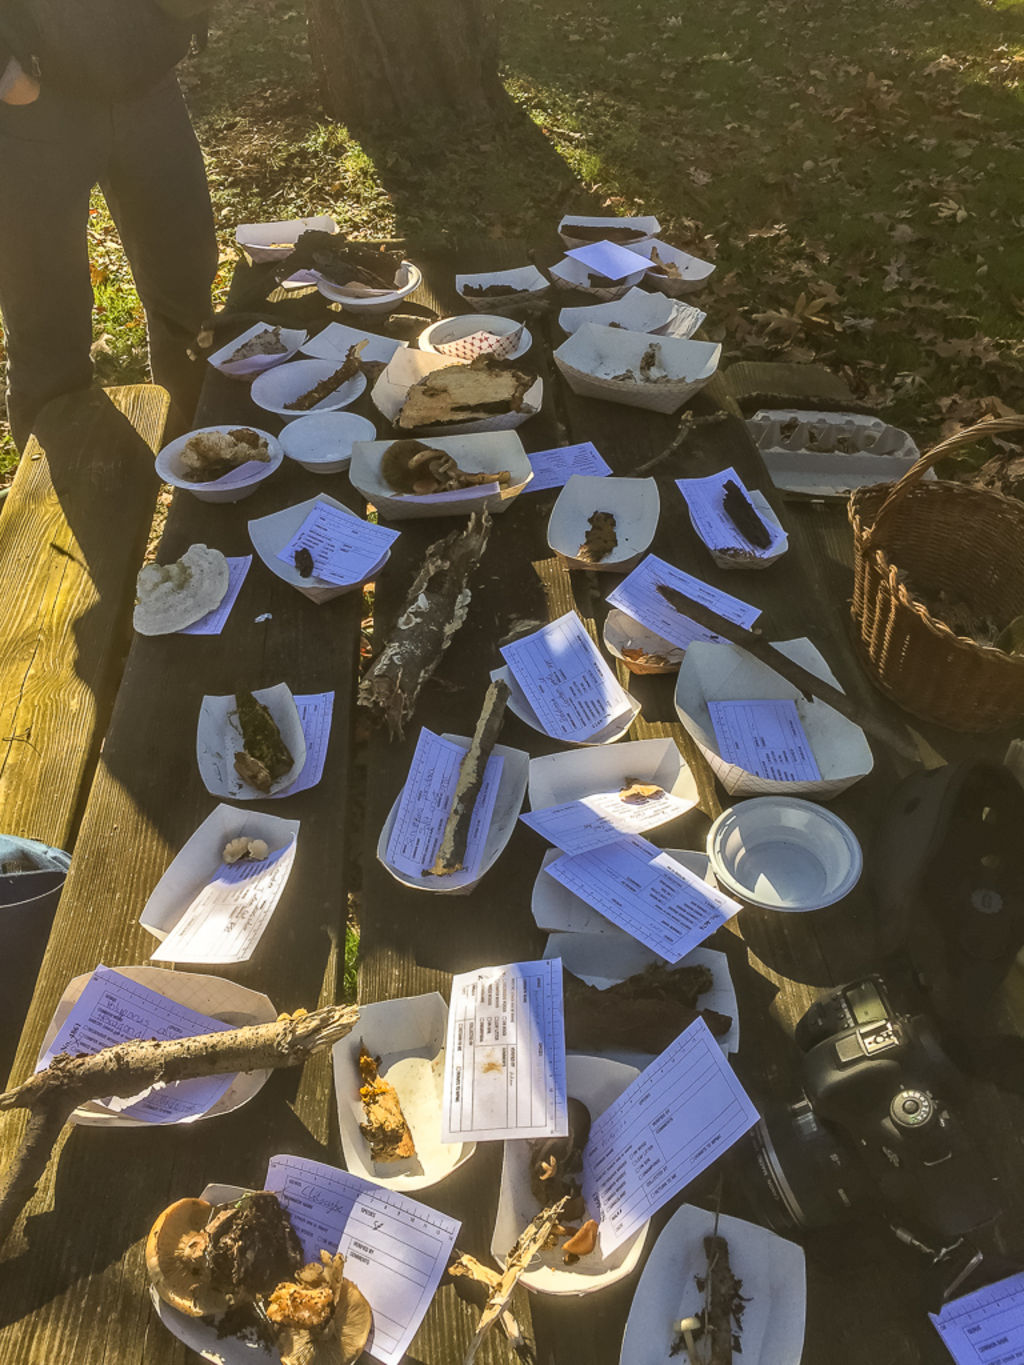 Sustainability at Home Series: Mushroom Cultivation!